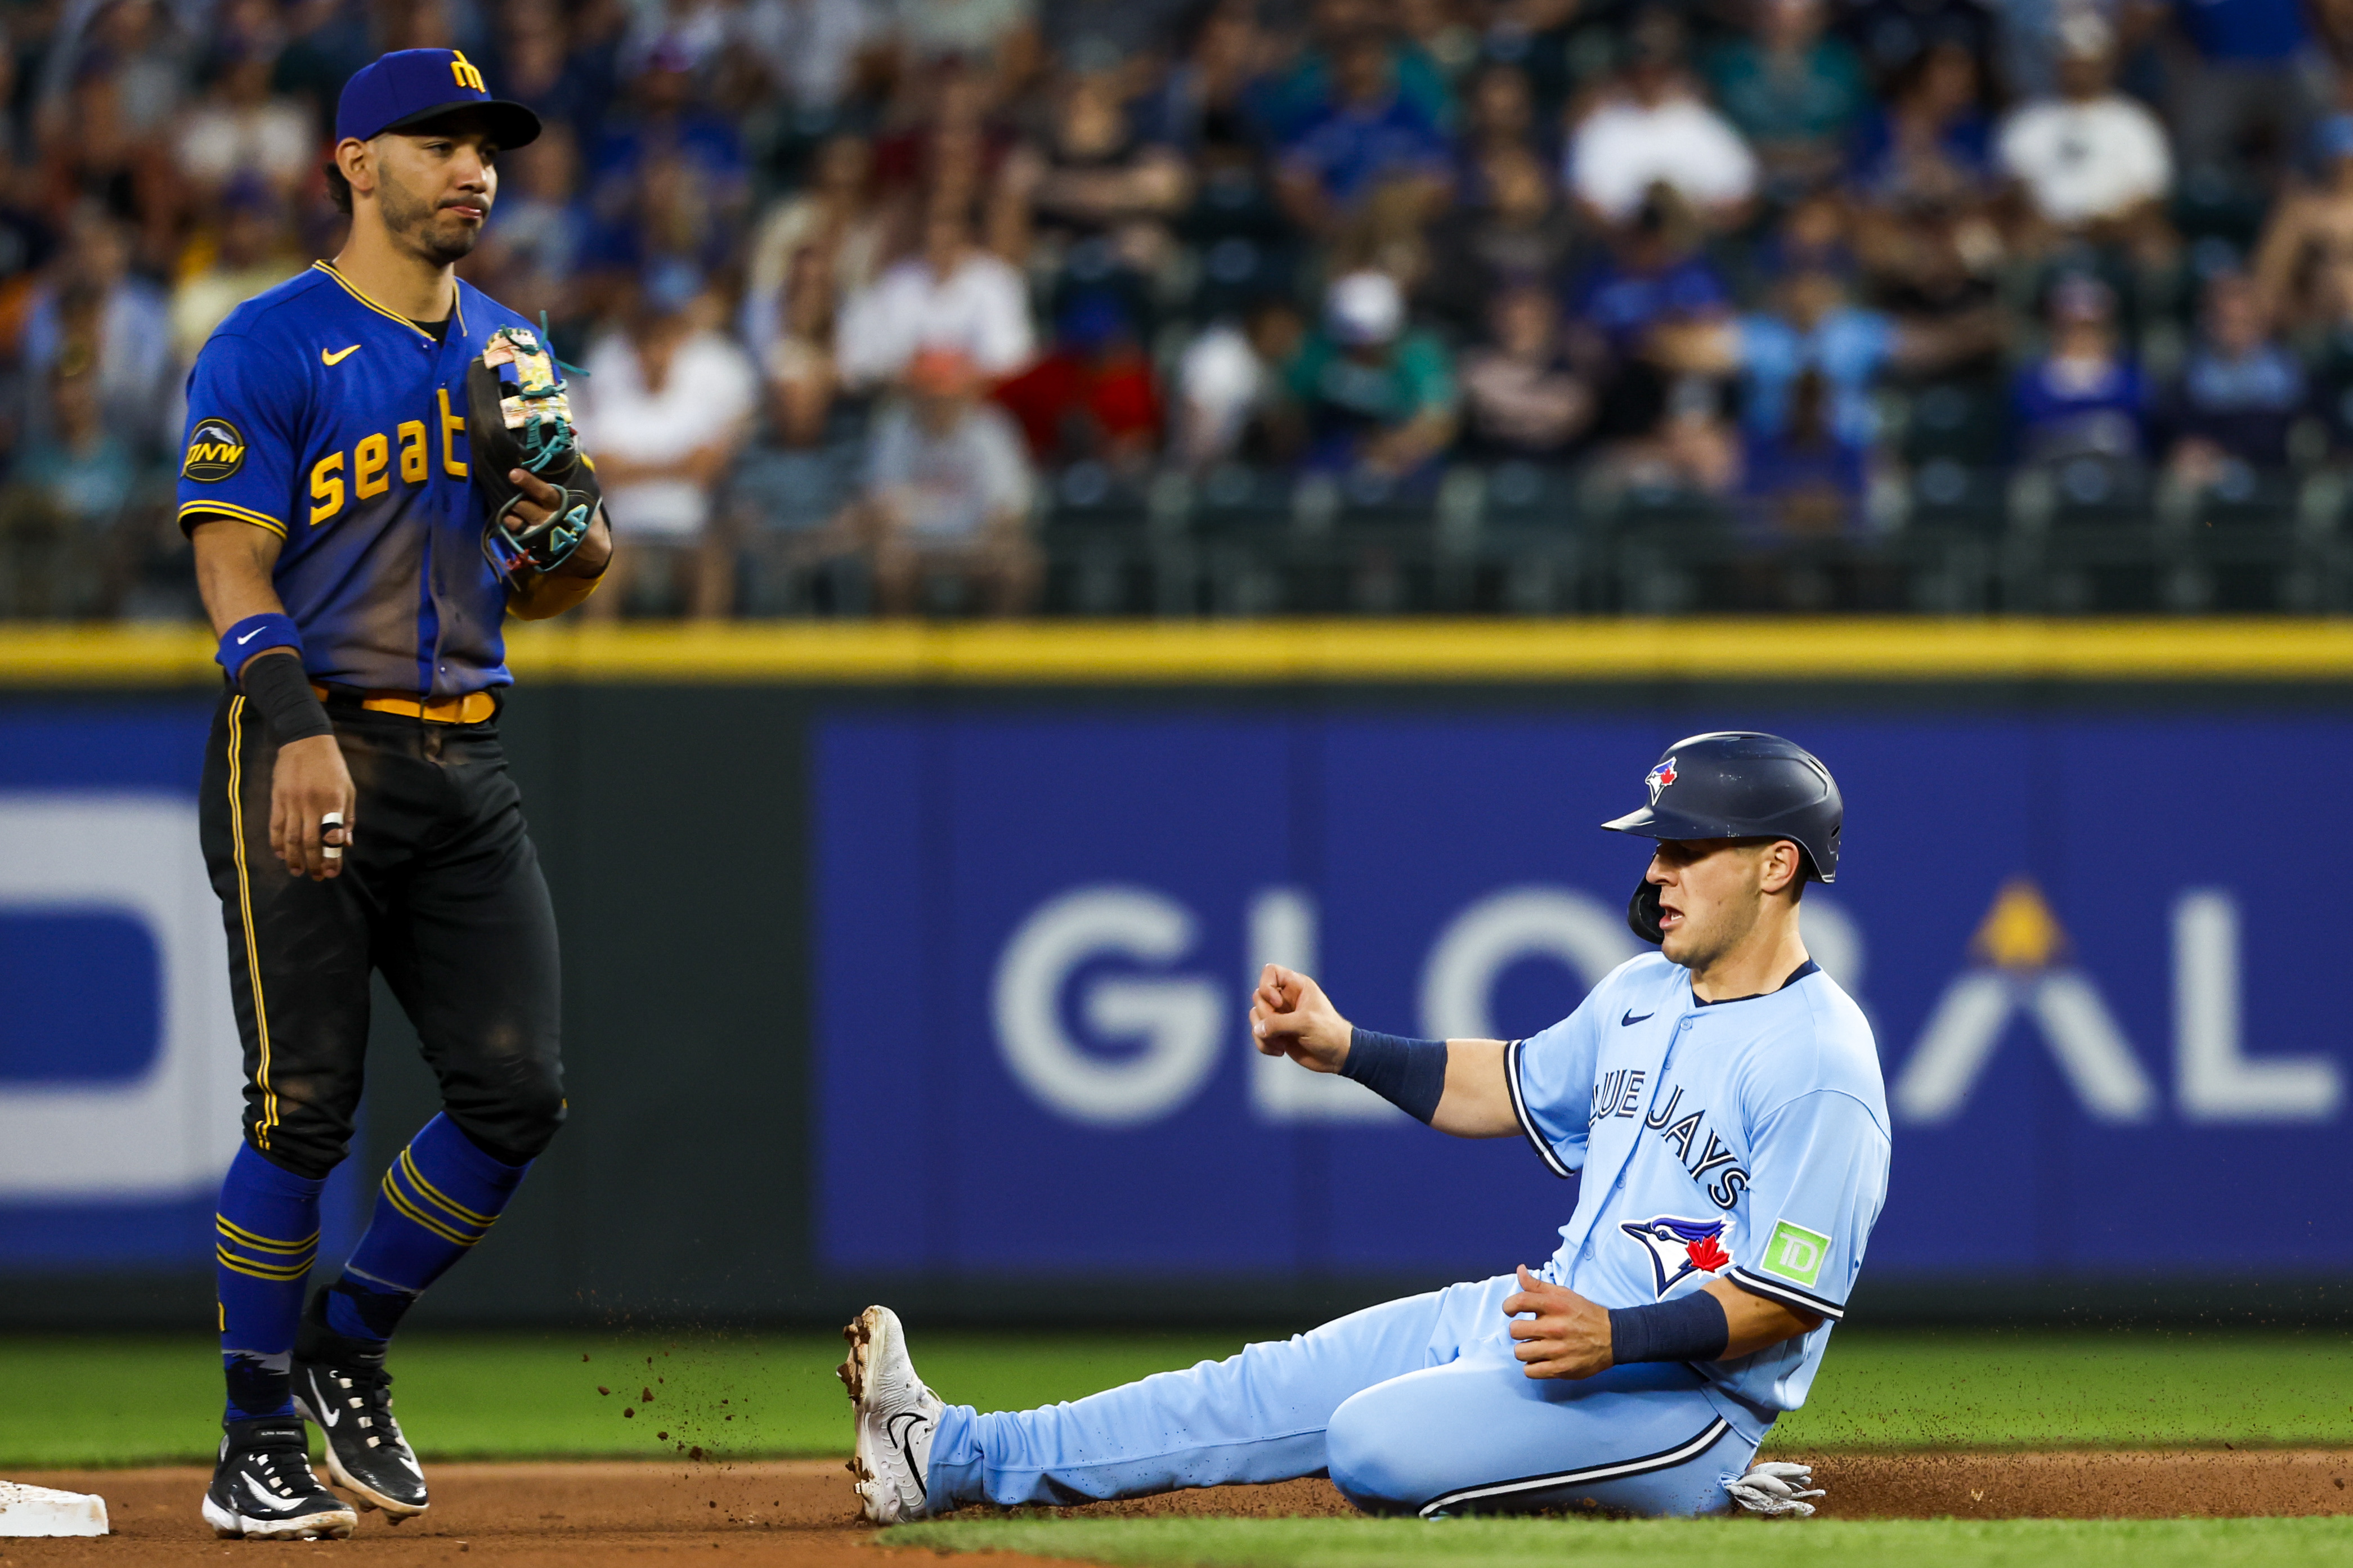 Mariners emerge with walk-off win over Blue Jays